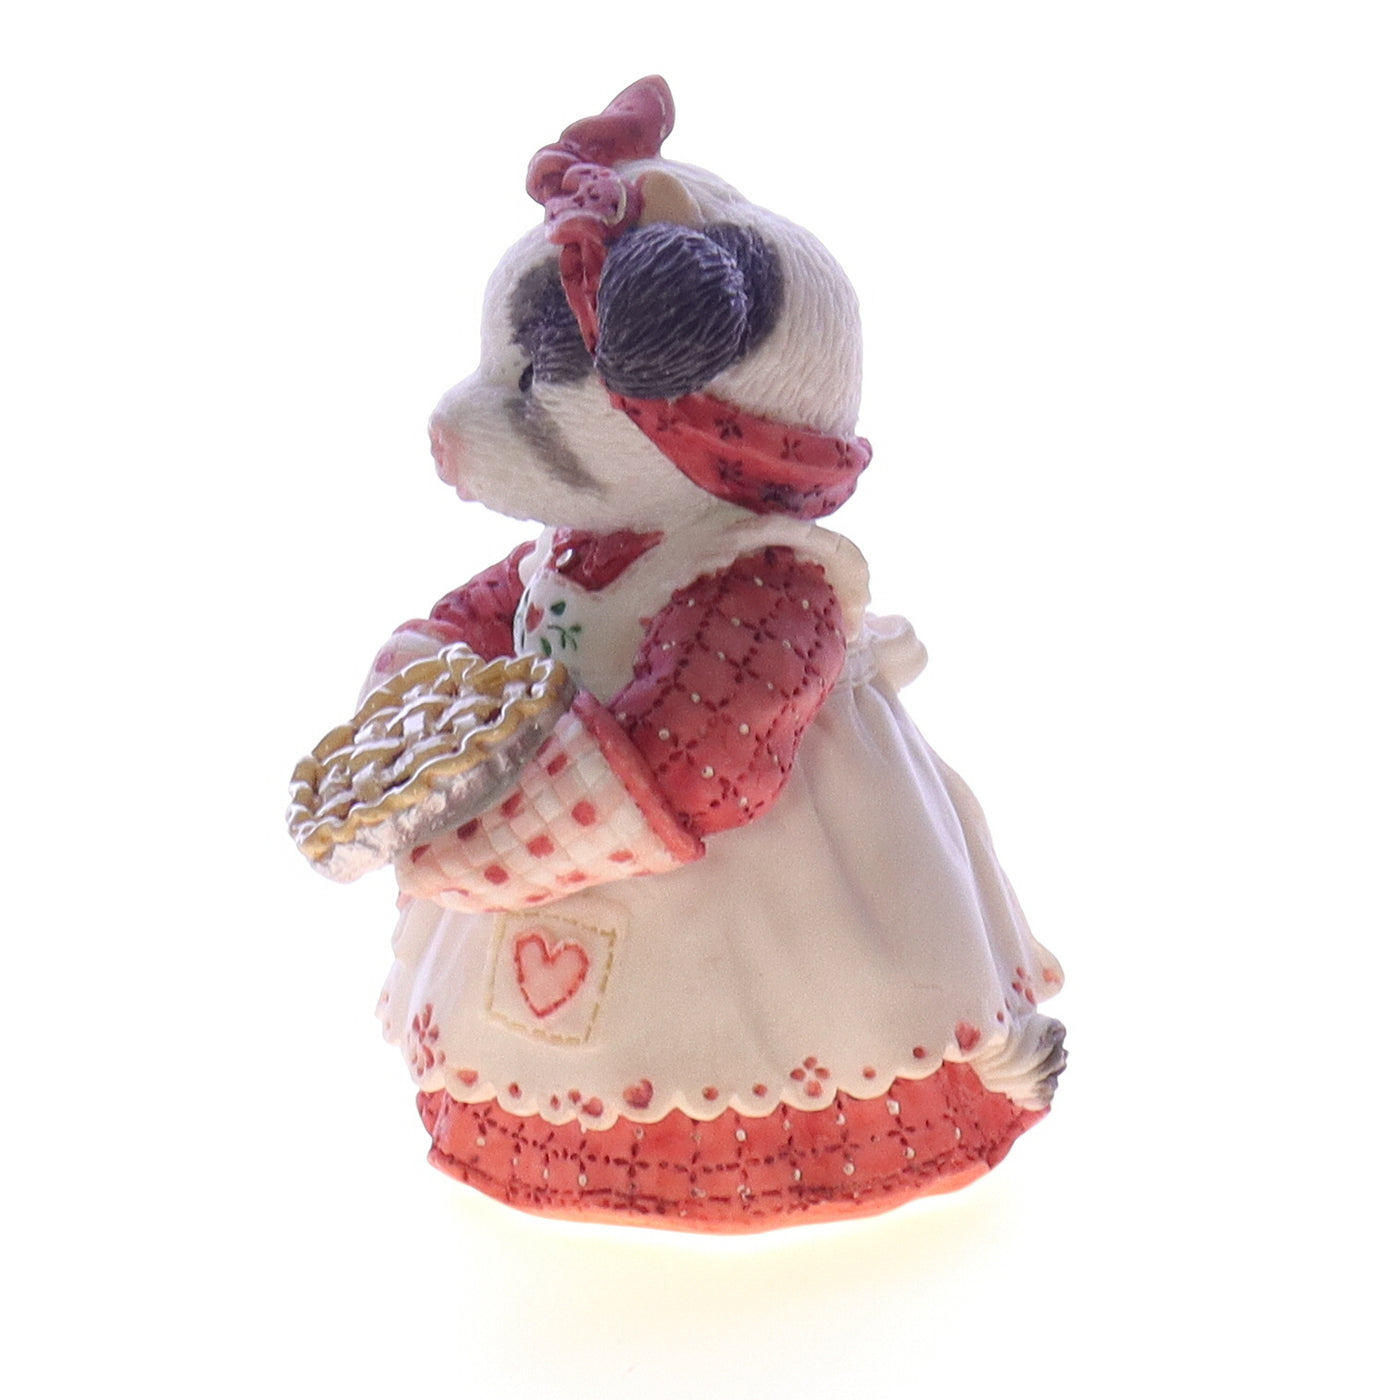 Marys_Moo_Moos_104272_Youre_My_Sweetie_Pie_Valentines_Day_Figurine_1994_Box Left Side View